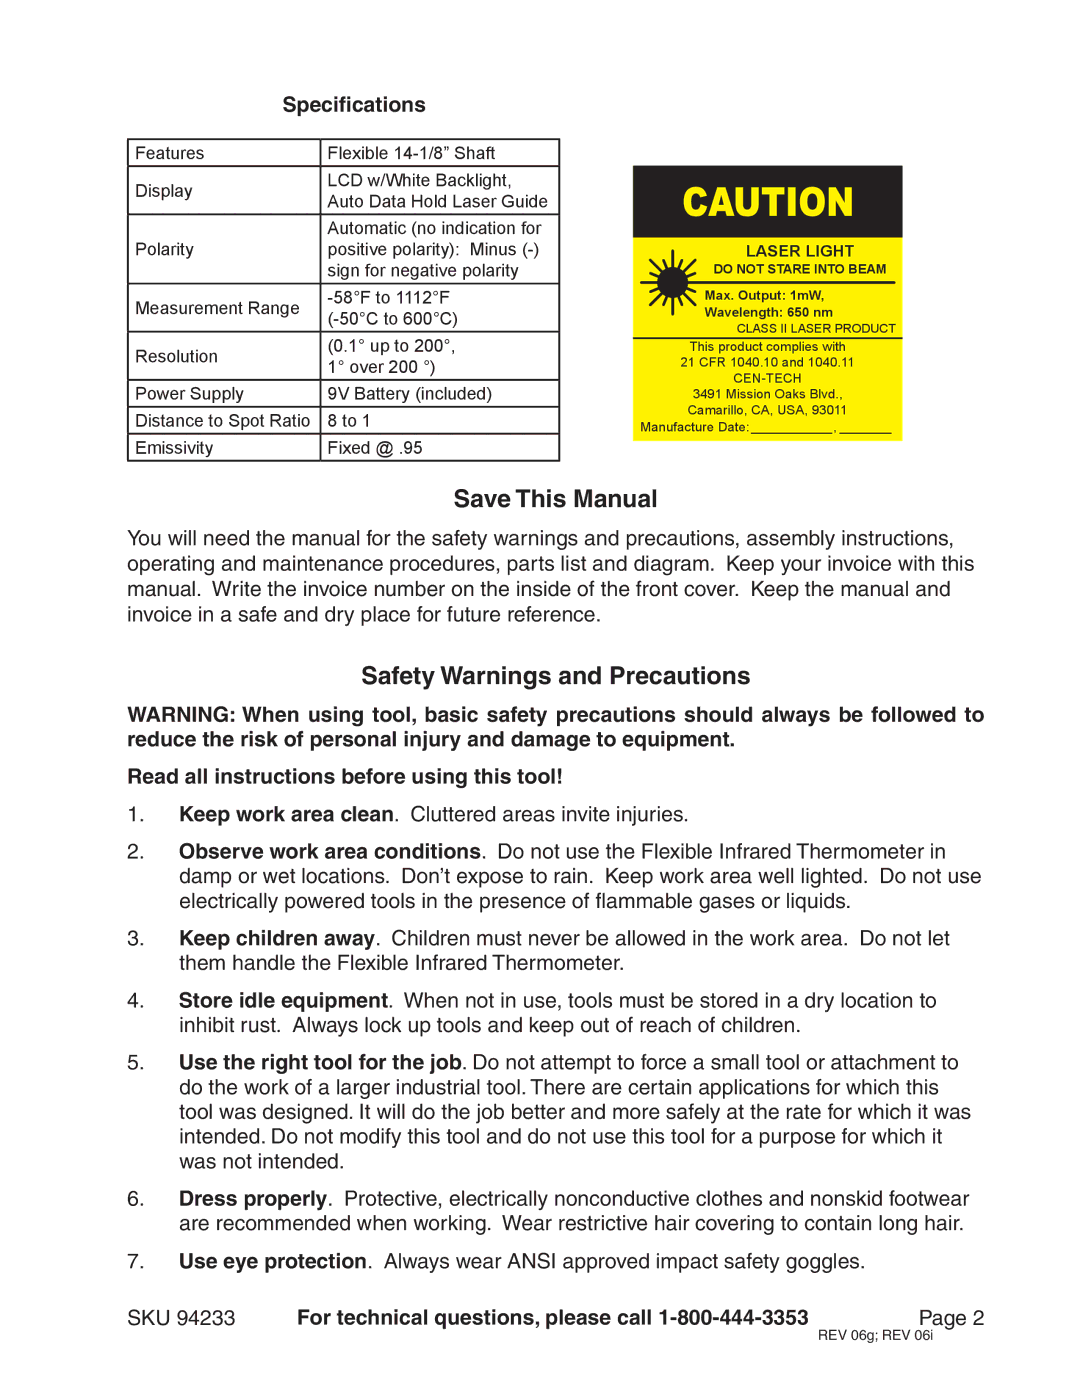 Harbor Freight Tools 94233 operating instructions Save This Manual, Safety Warnings and Precautions, Specifications 